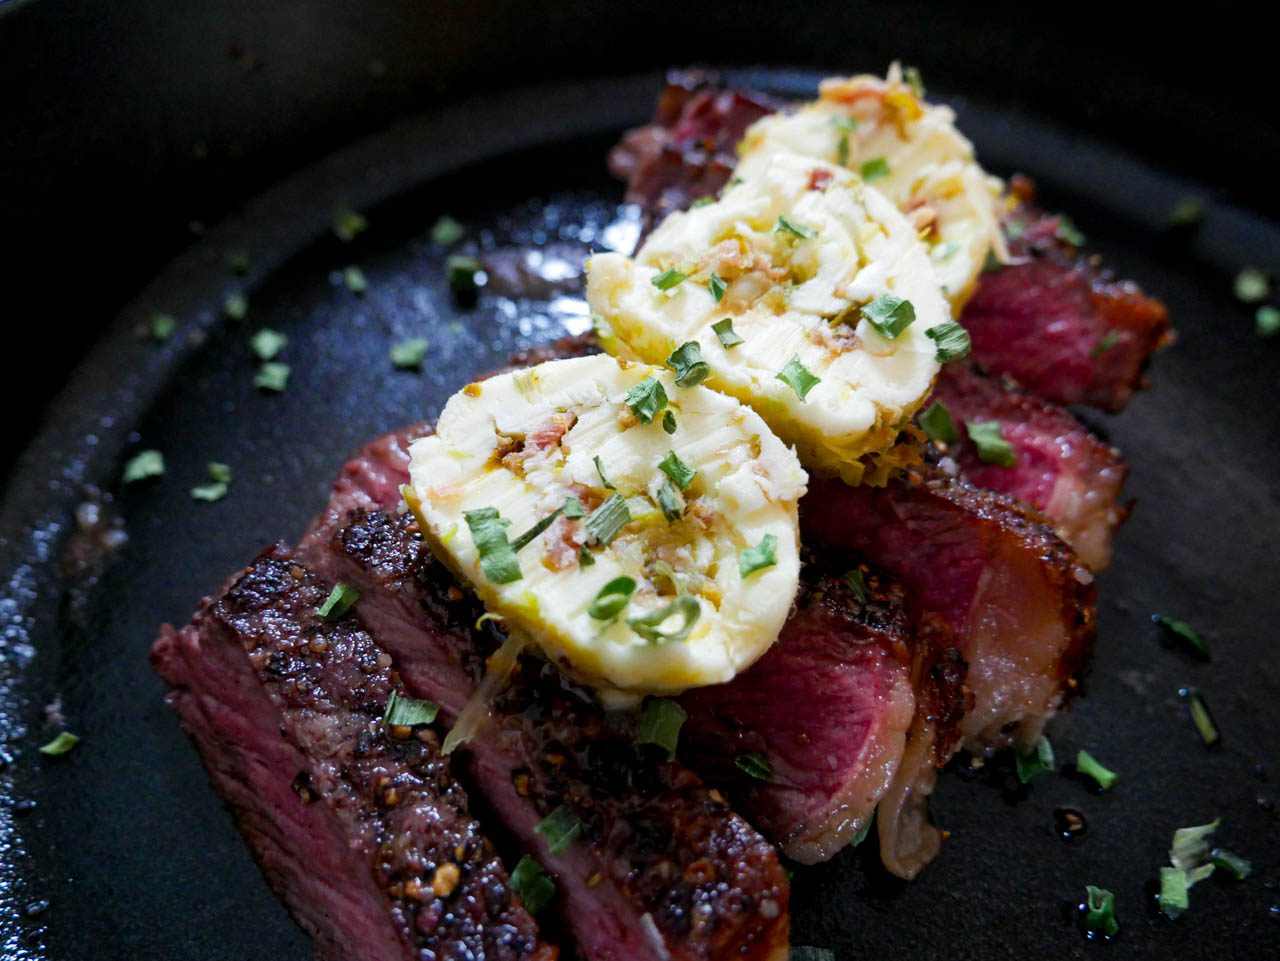 Leek and bacon compound butter on steak